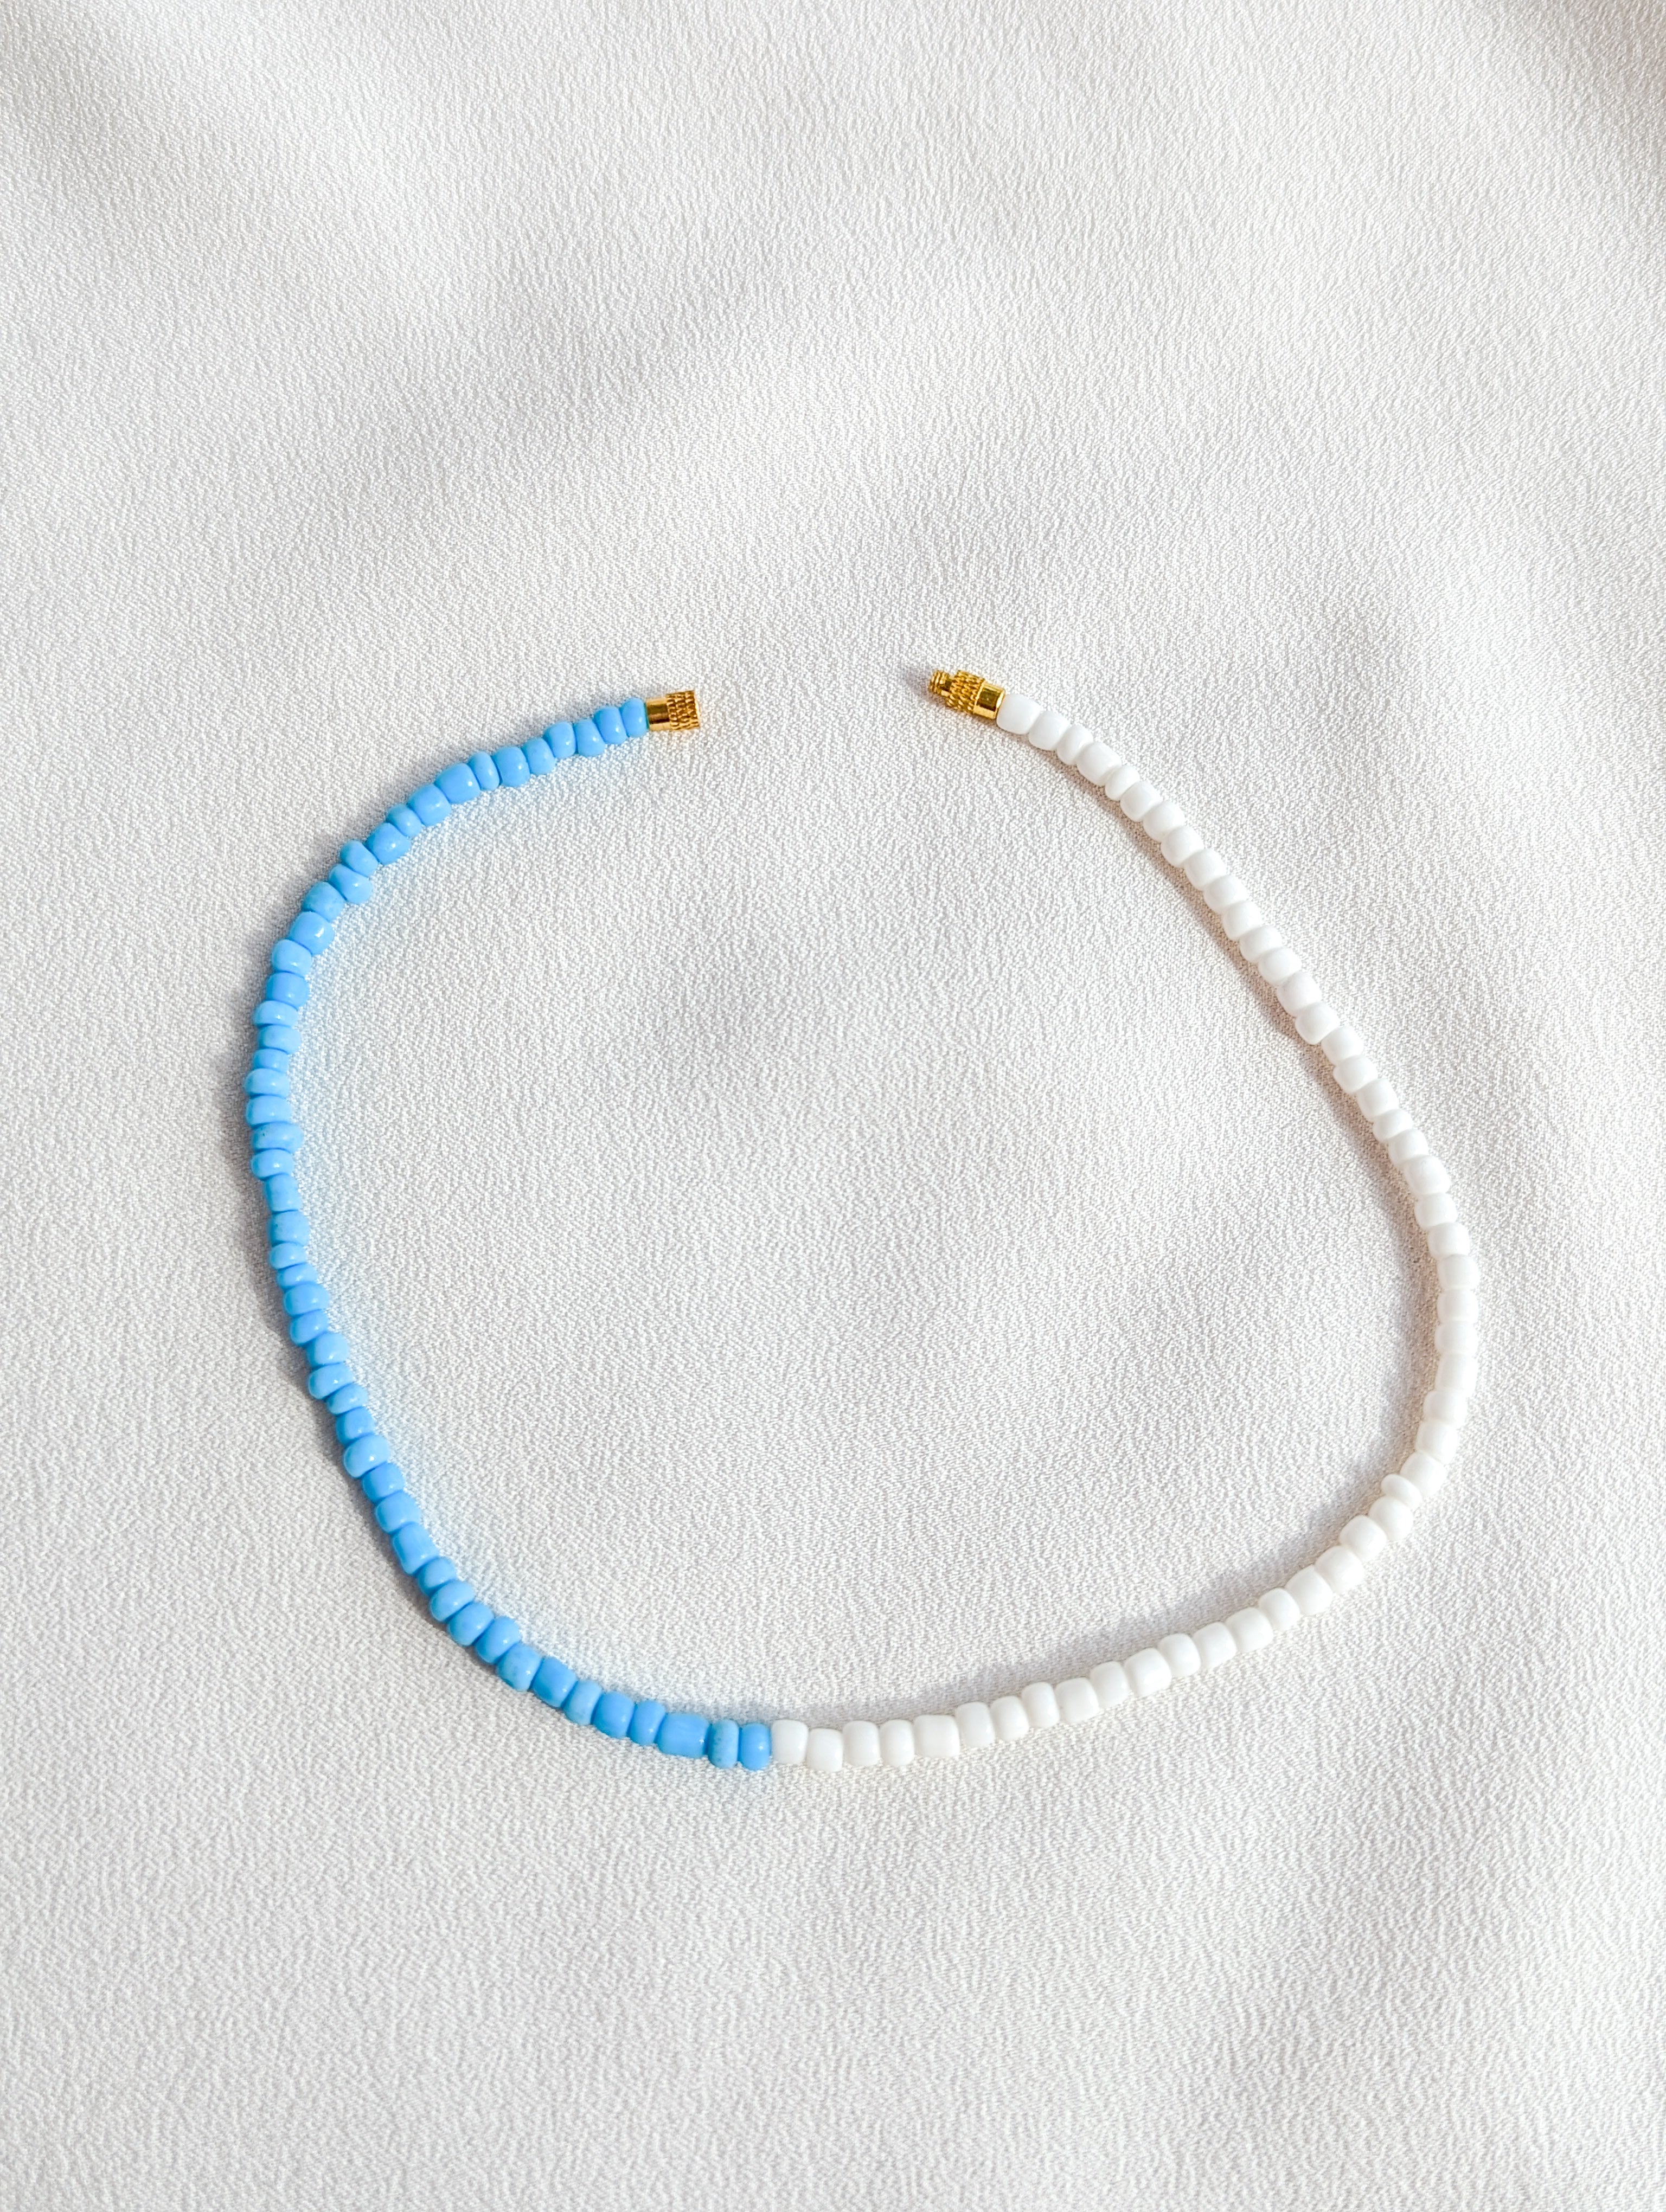 [THE FIFTY] Necklace: White/Blue [Large Beads]